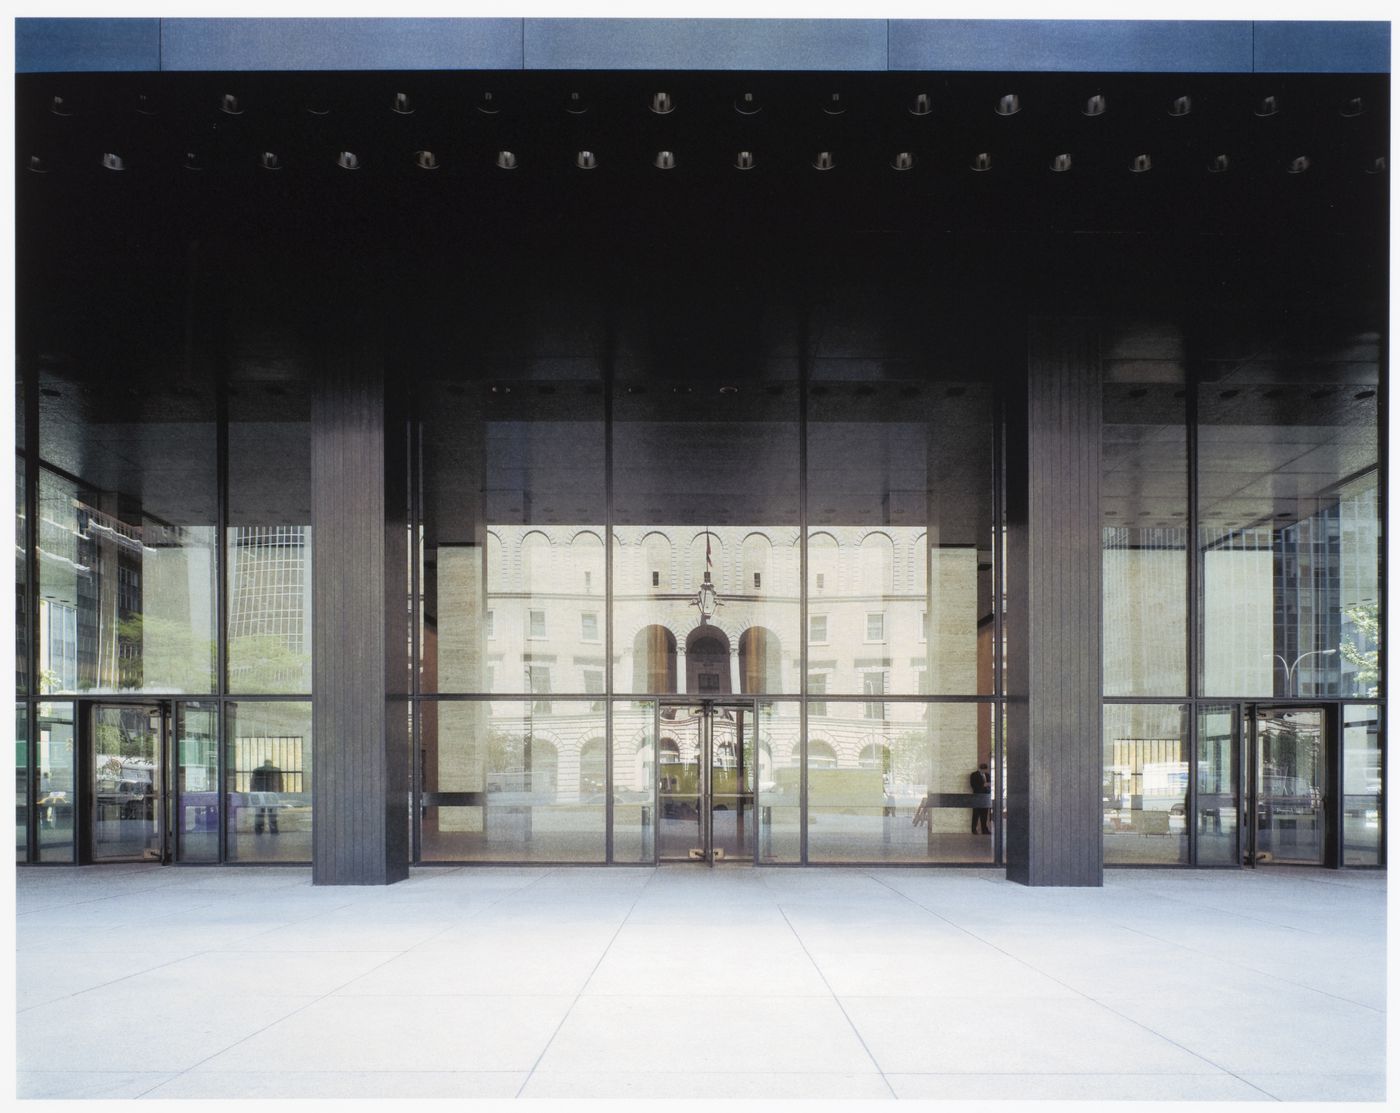 Seagram Building, New York City: view from under the canopy, with the Racquet and Tennis Club reflected in the lobby enclosure